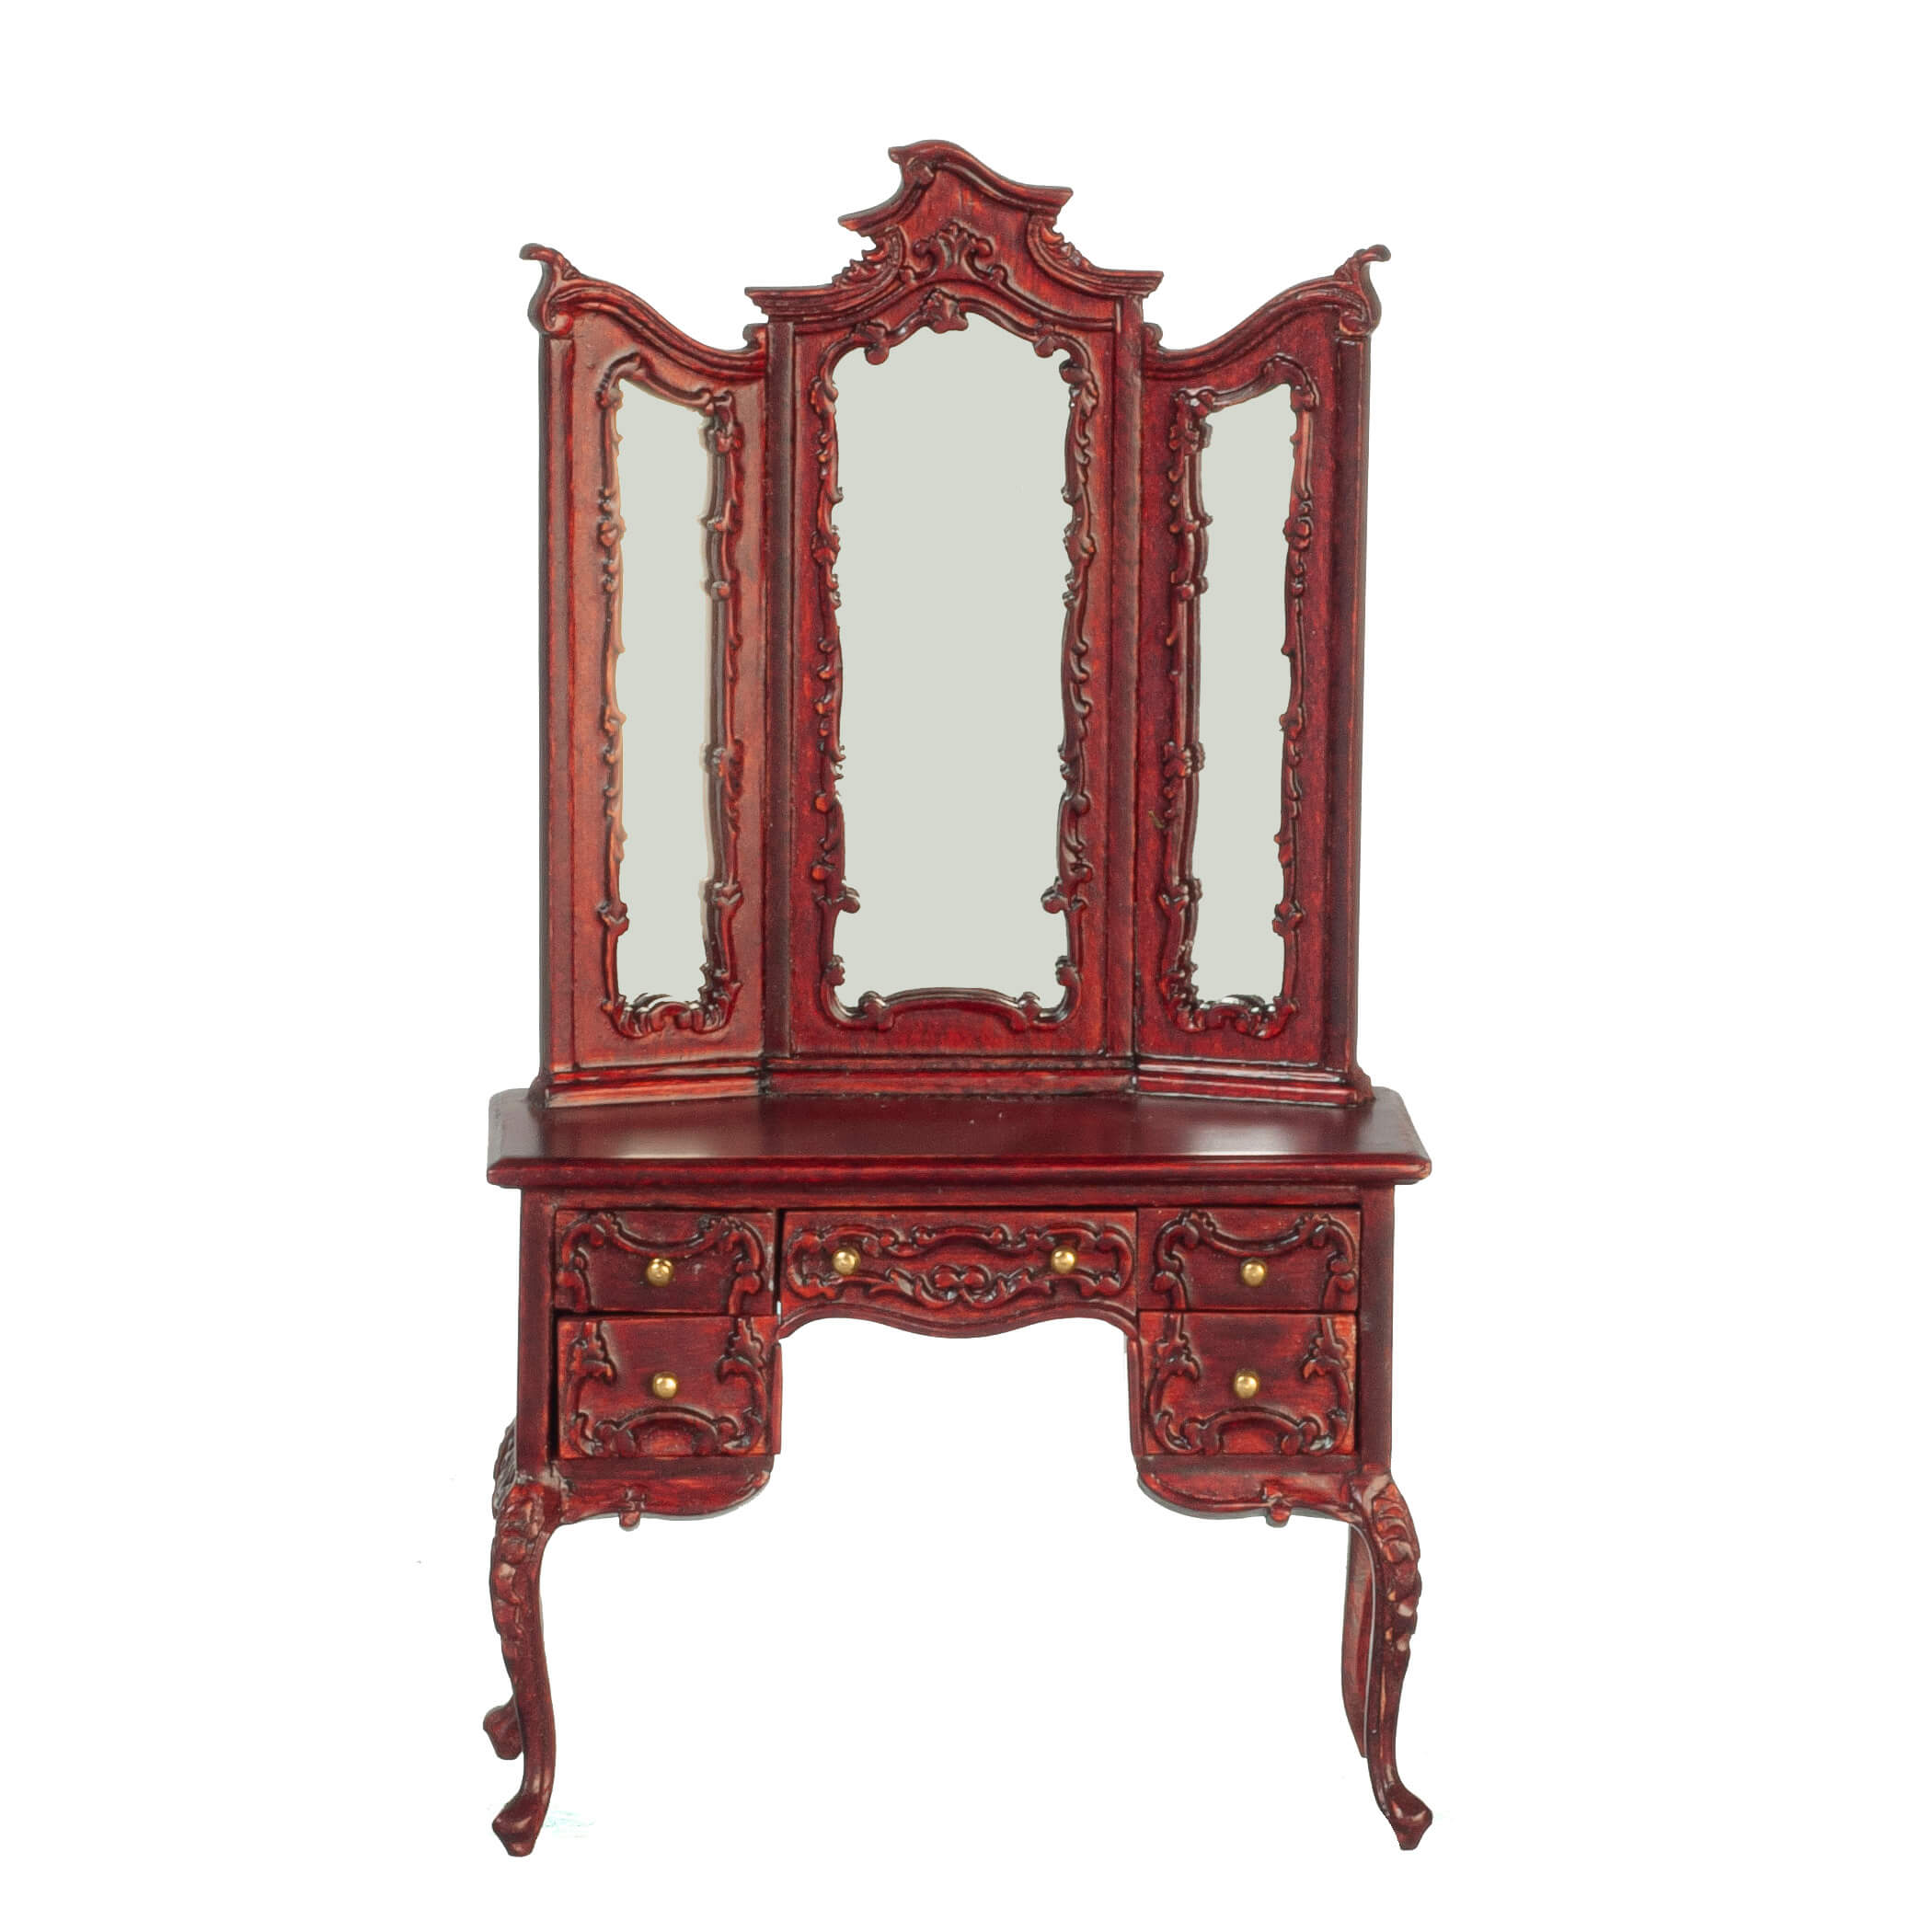 Intricate Dressing Table w/ Mirror - Mahogany